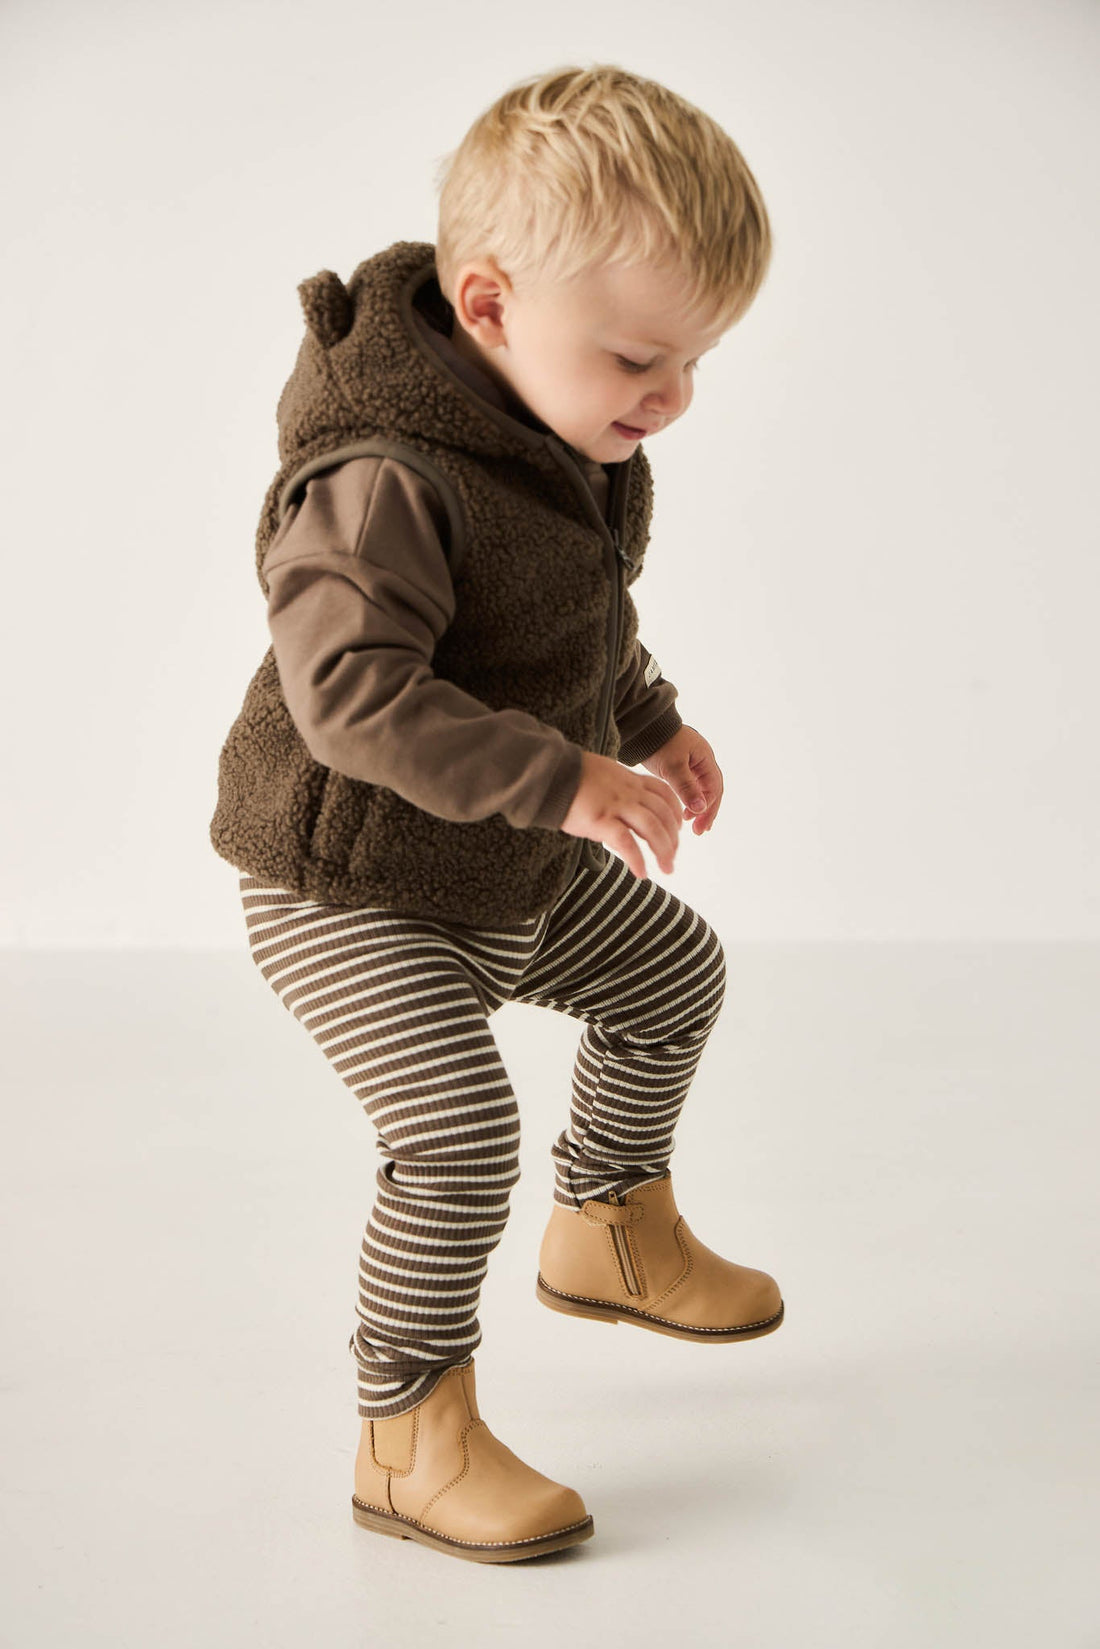 Leather Boot with Elastic Side - Bronzed Childrens Footwear from Jamie Kay USA